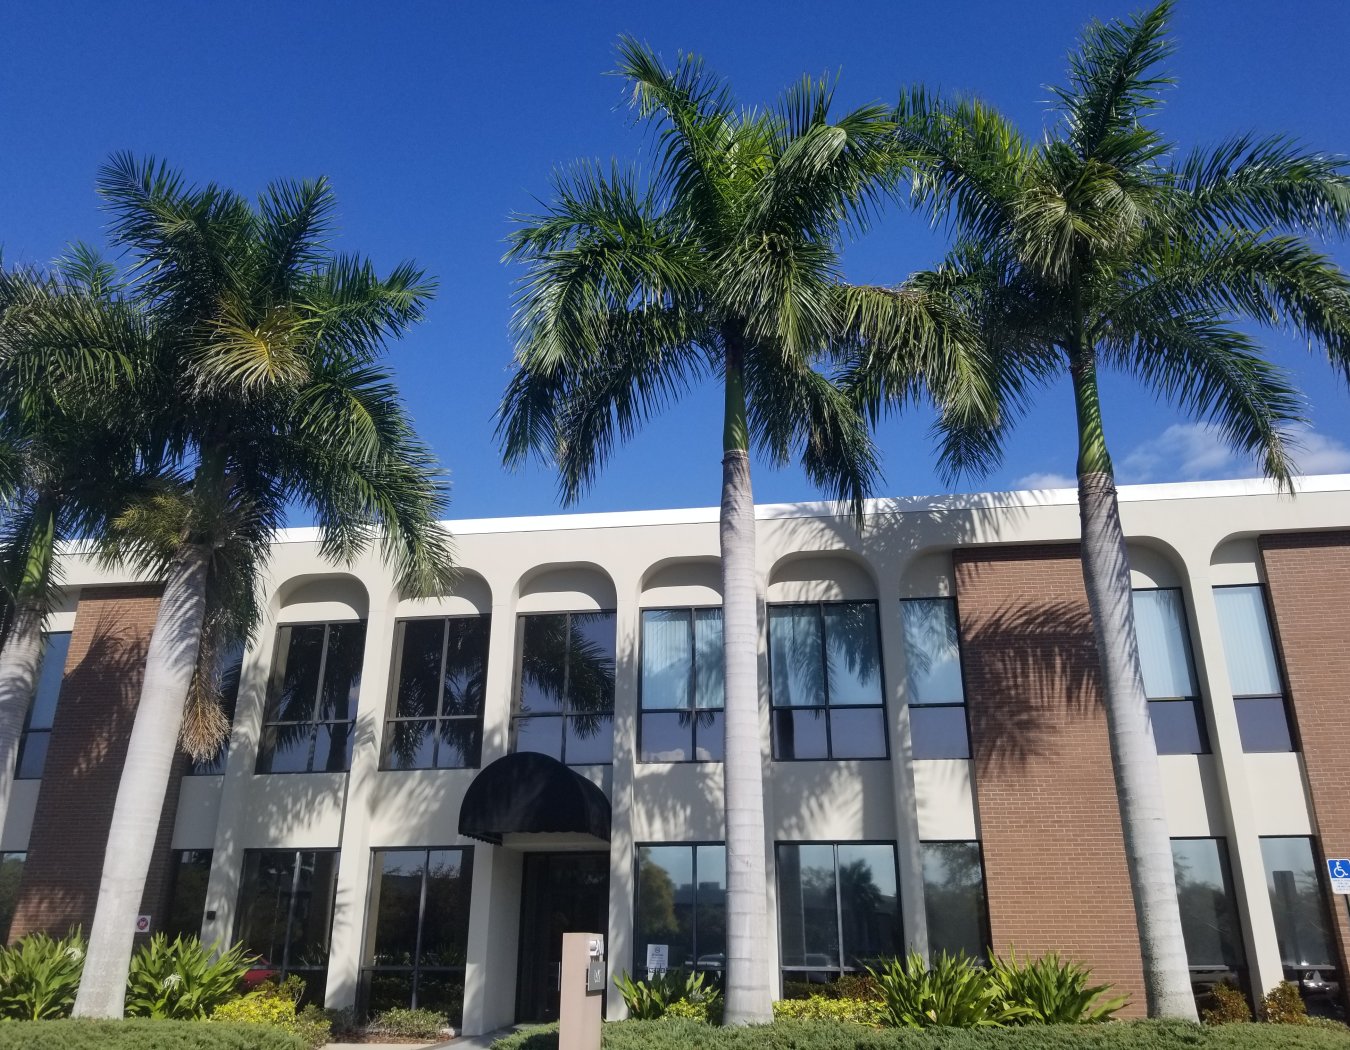 Exterior of a building on the St. Petersburg, Florida campus of Utica University.